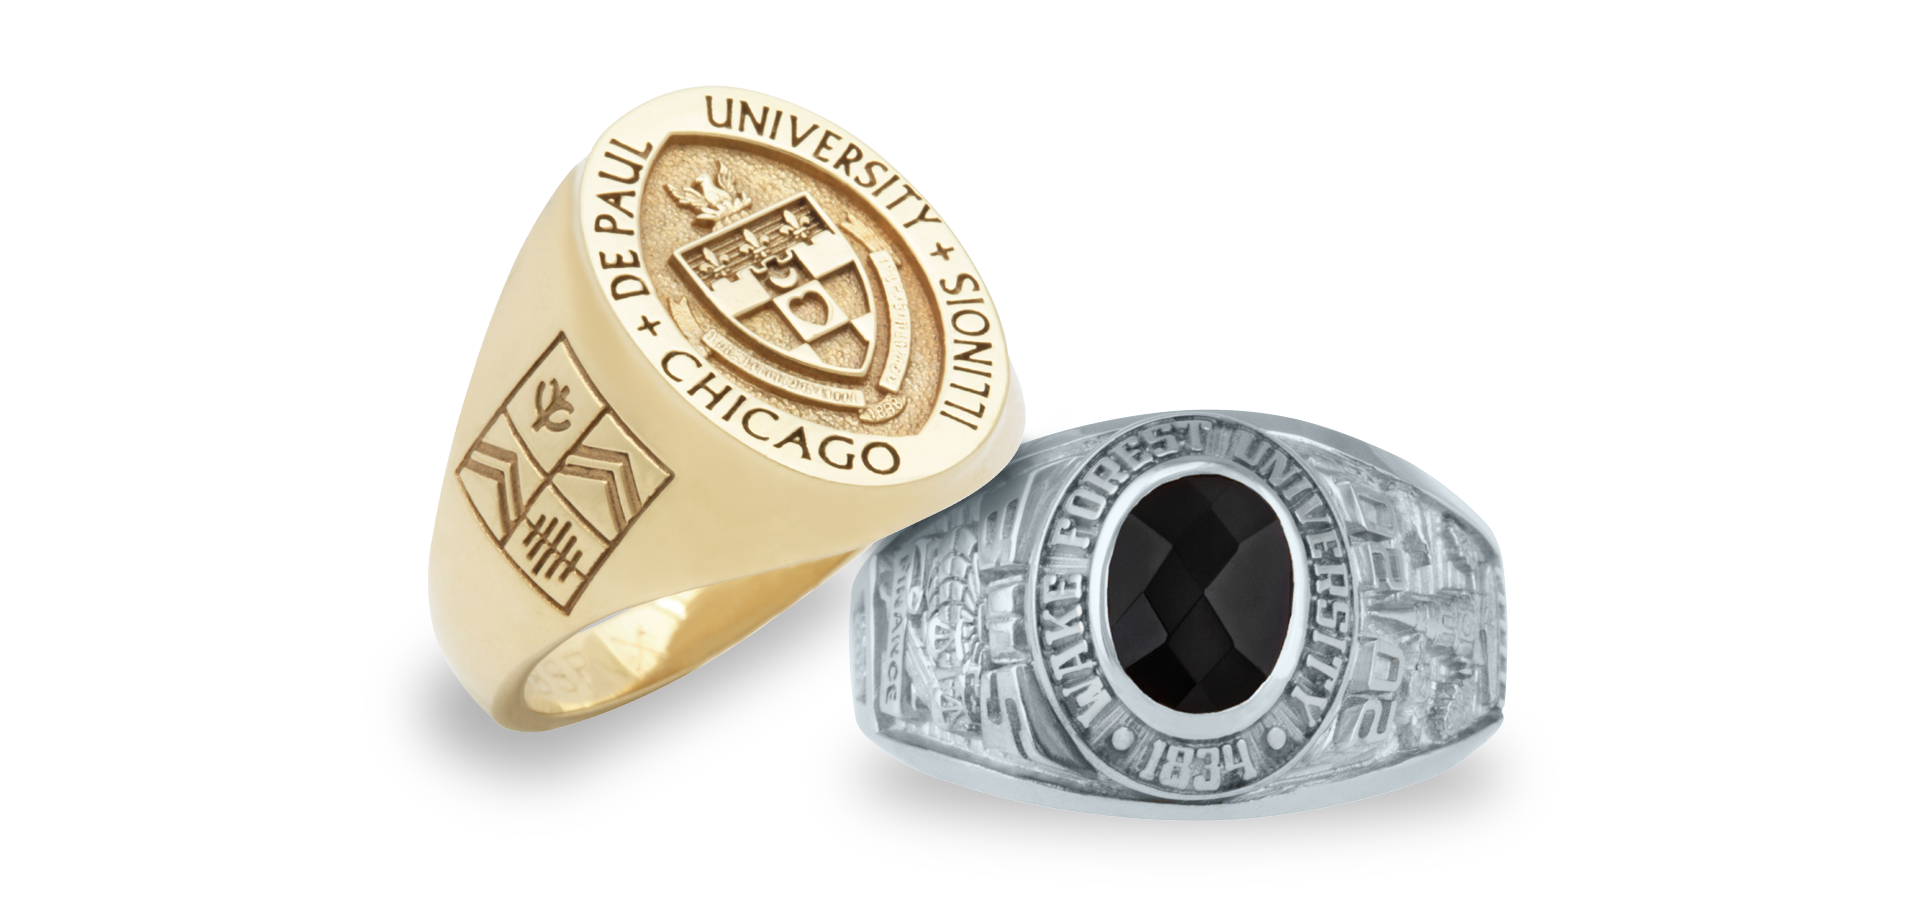 image of example University of West Florida rings